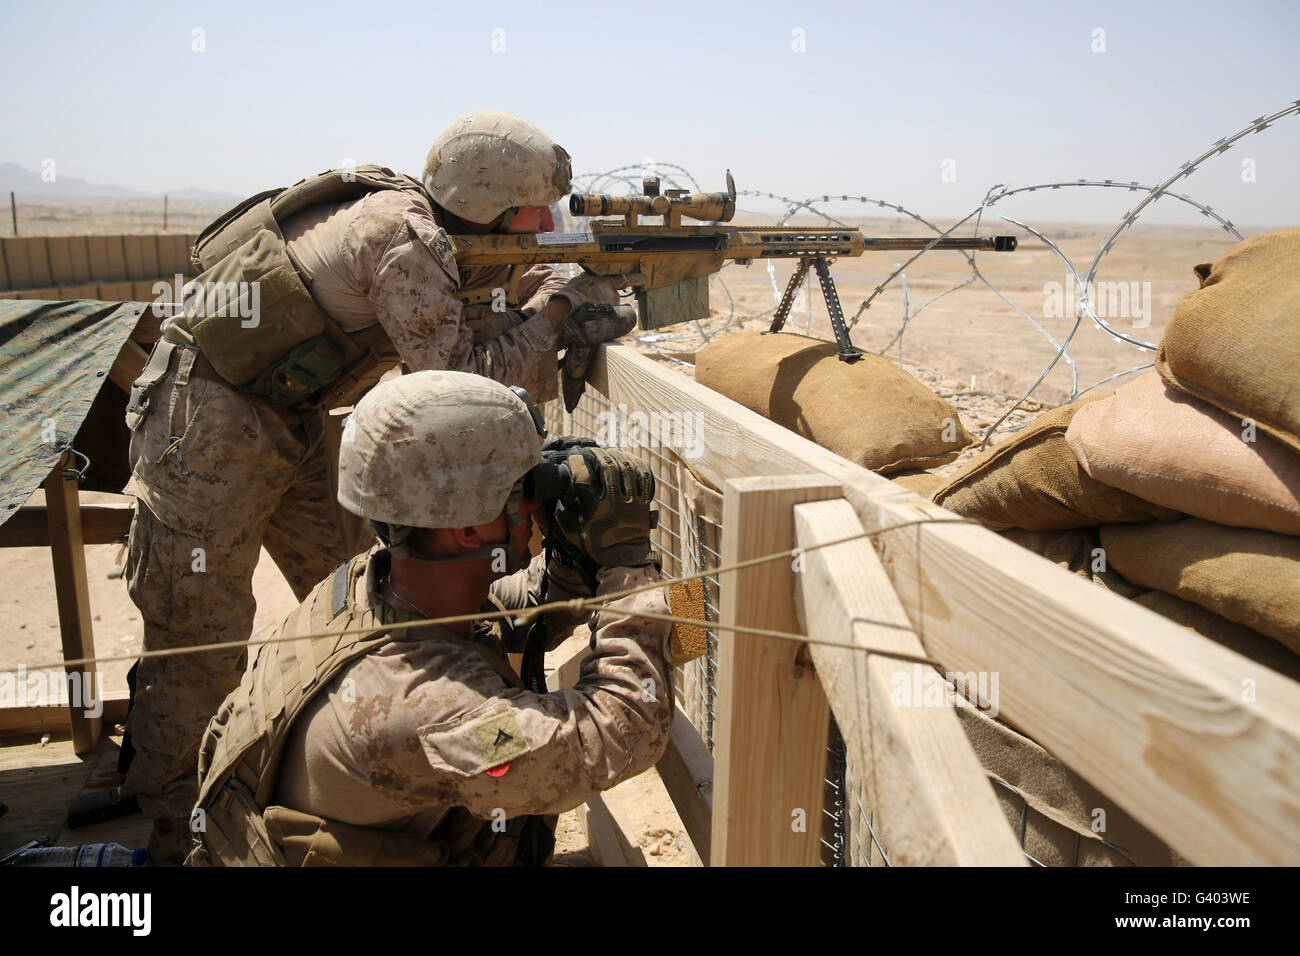 U.S. Marines man security positions during a mission in Afghanistan. Stock Photo